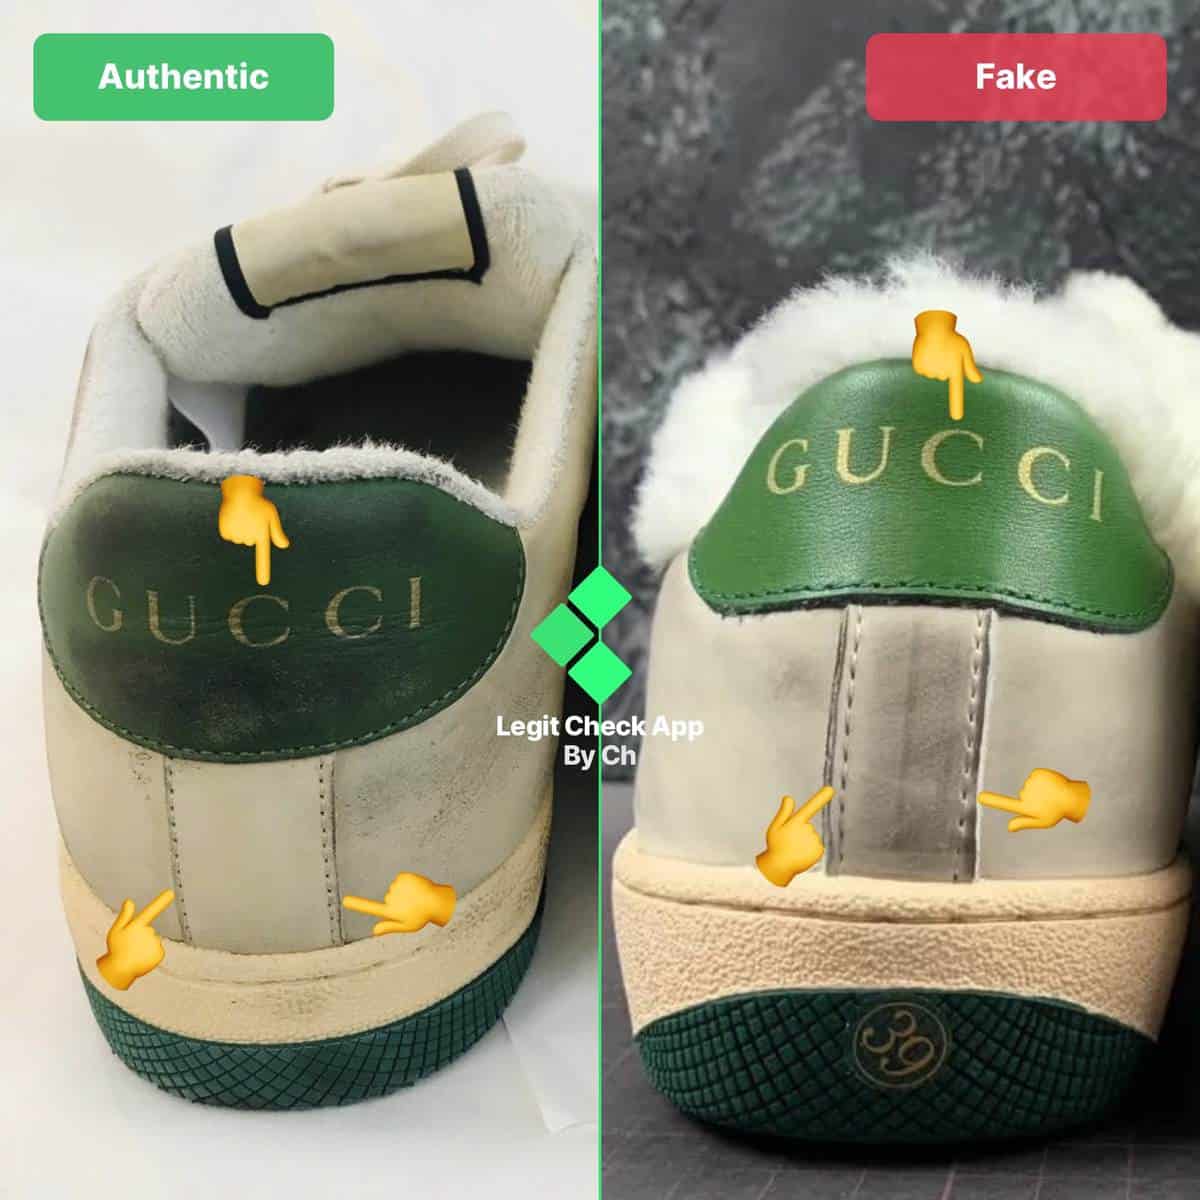 Tether finger efter skole How To Spot Fake Gucci Screener Sneakers - Legit Check By Ch